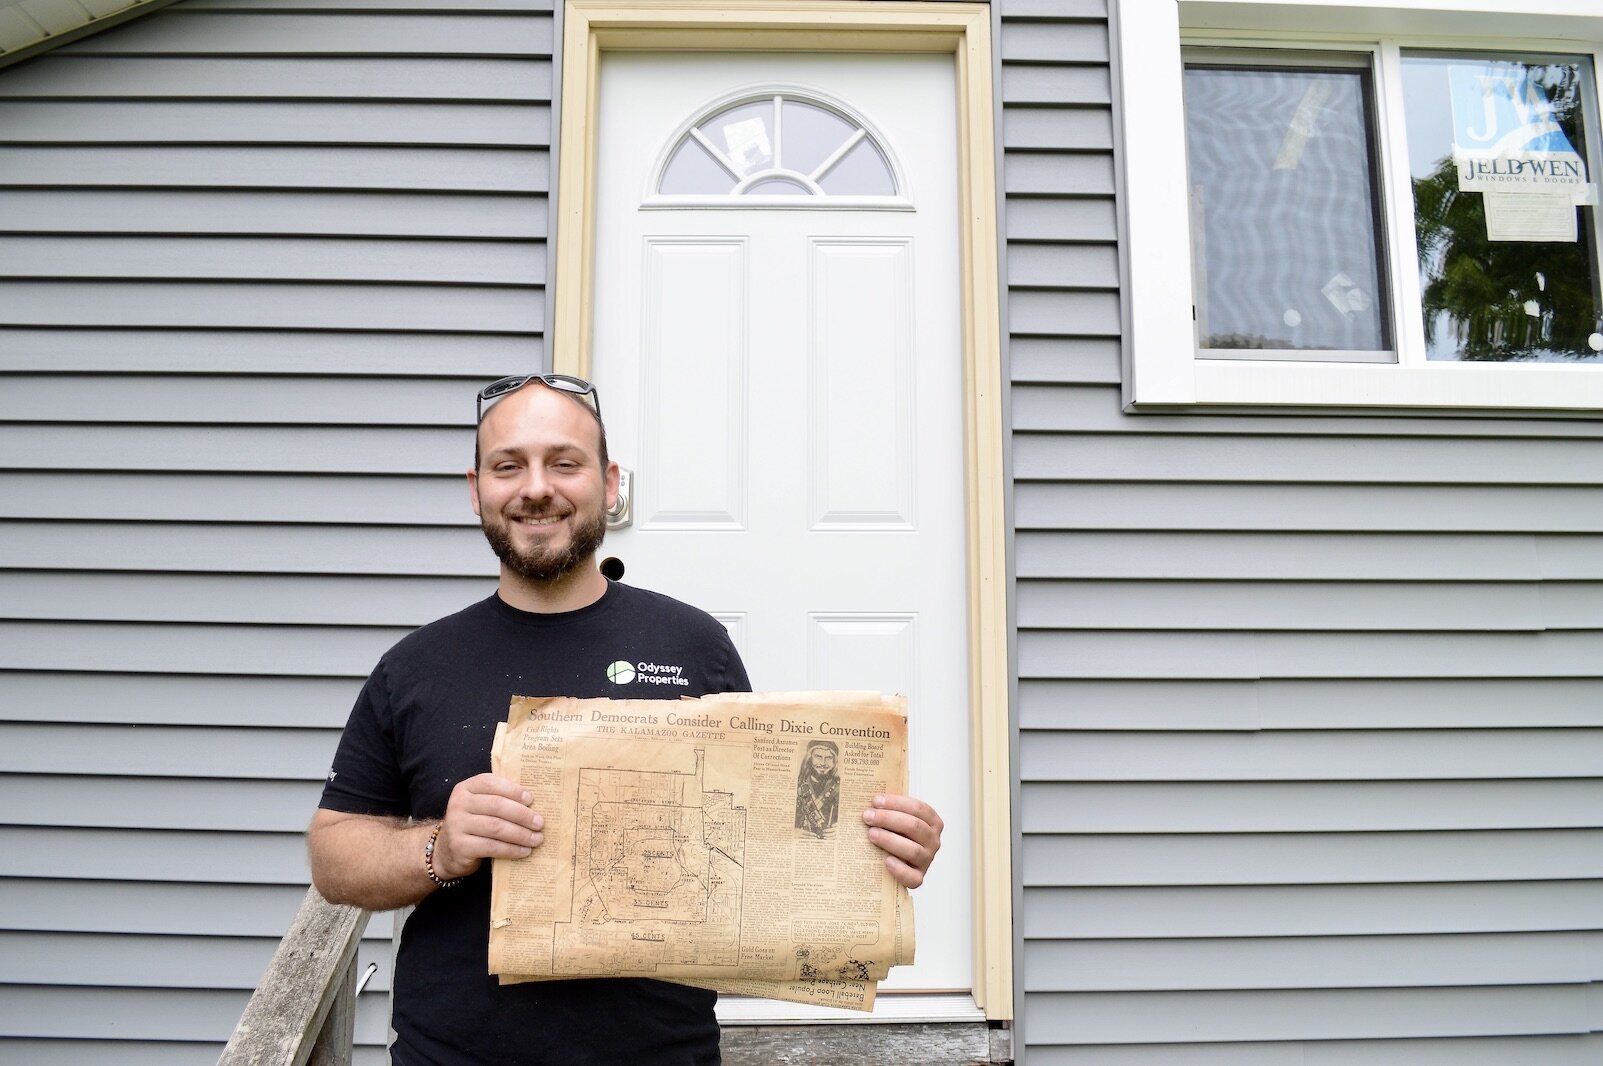 Jake Tardani with a 1948 Kalamazoo Gazette. He discovered a stack of papers going back to World War II at 1028 Denner. He says he appreciates the history and connections with Kalamazoo these old houses represent.  